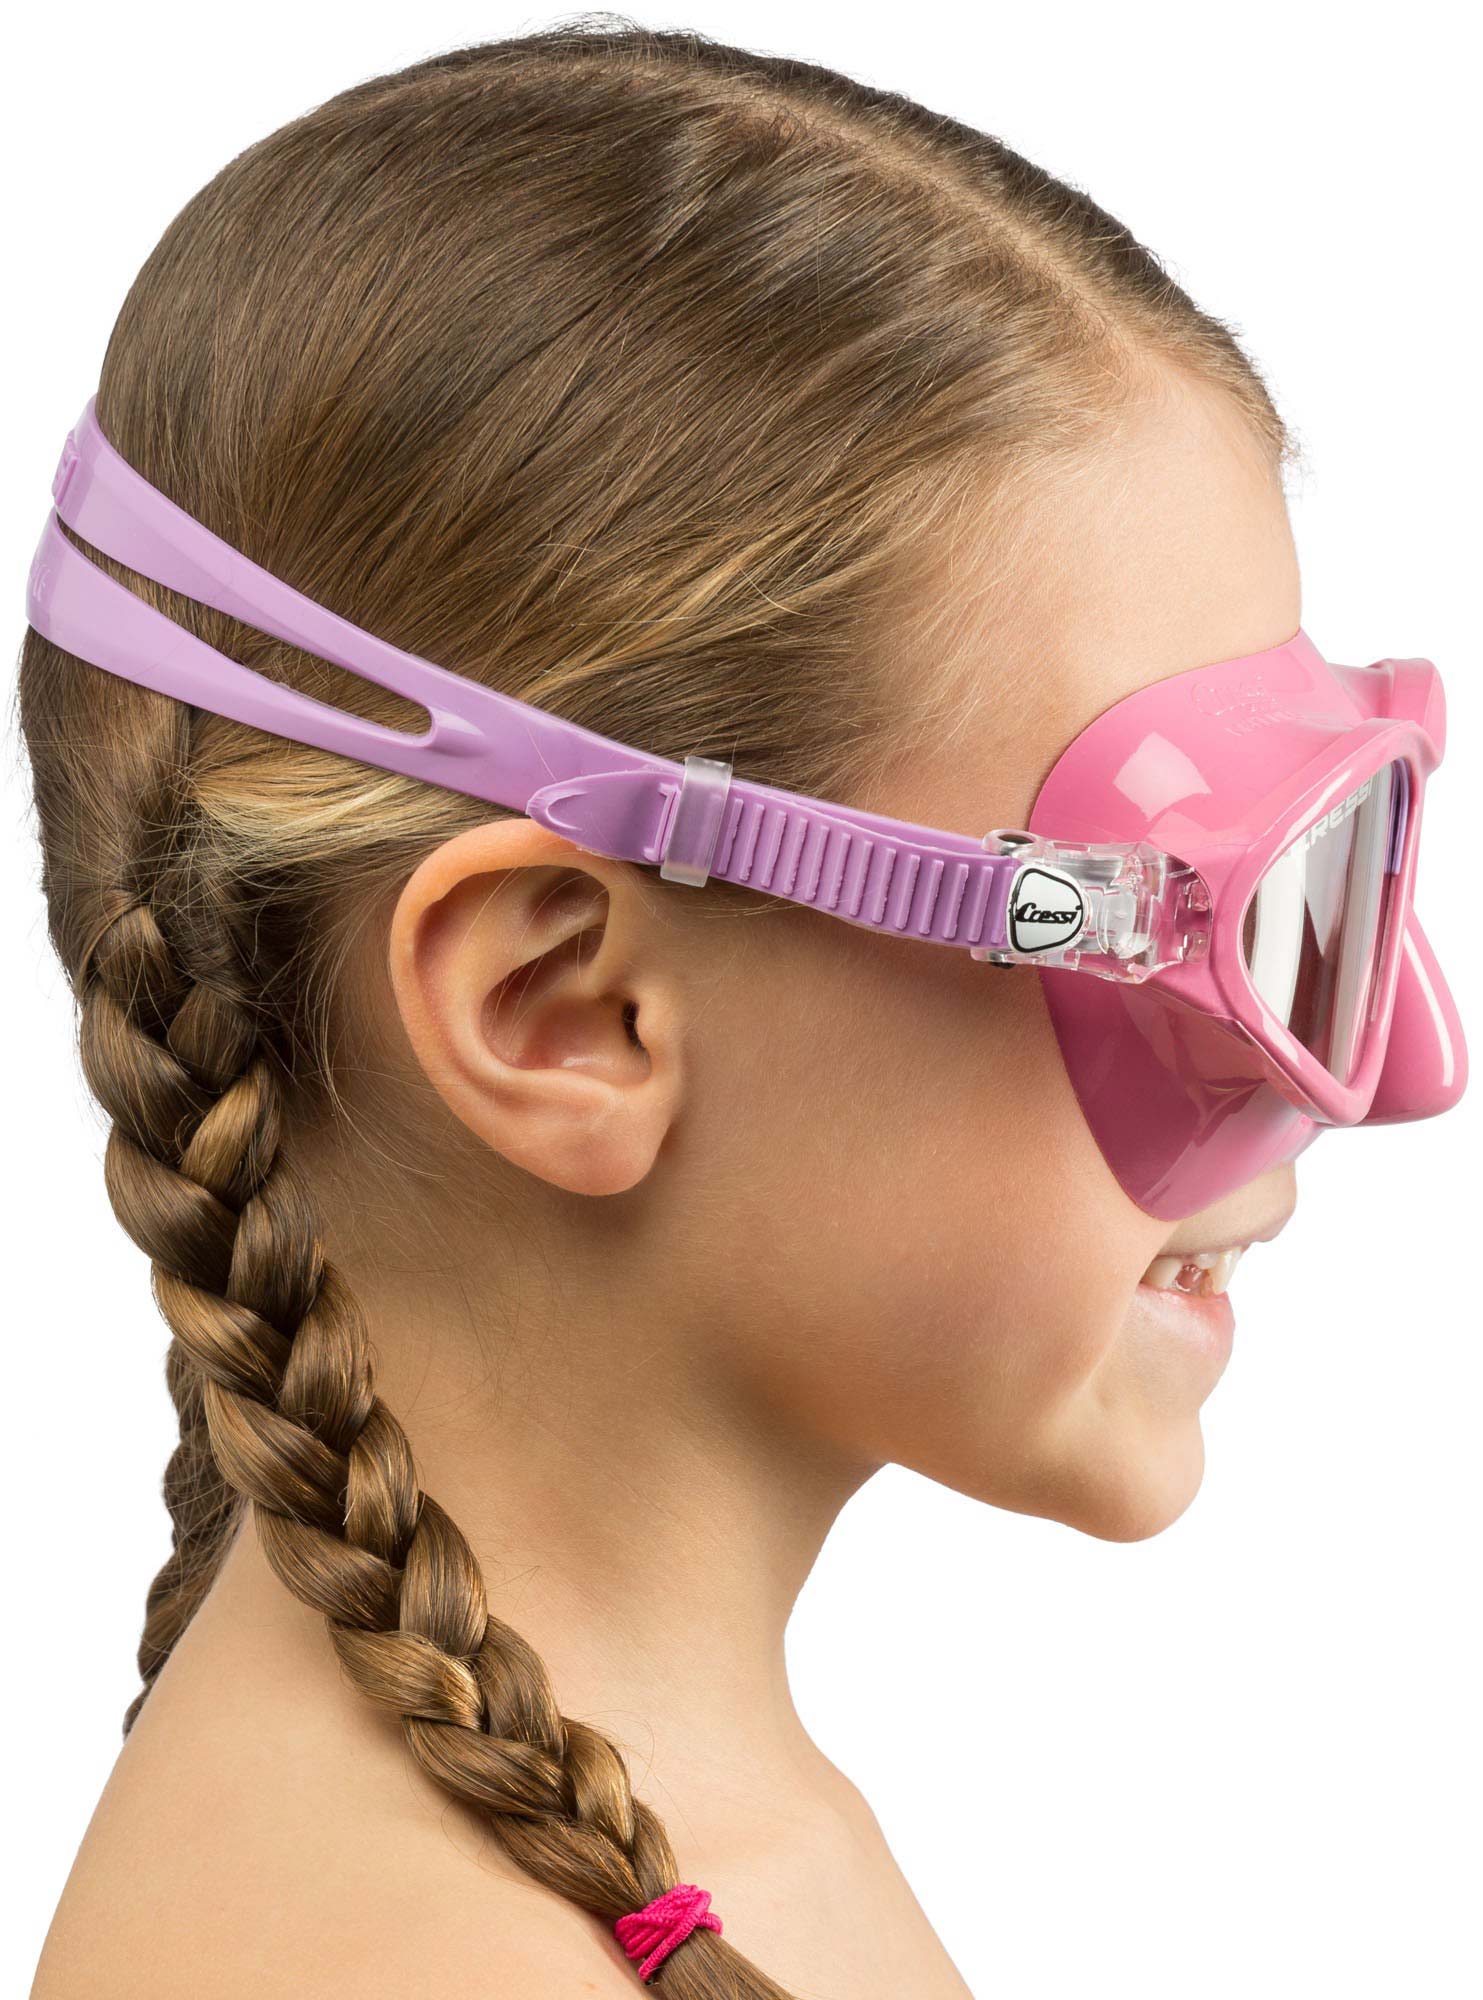 Children's diving goggles